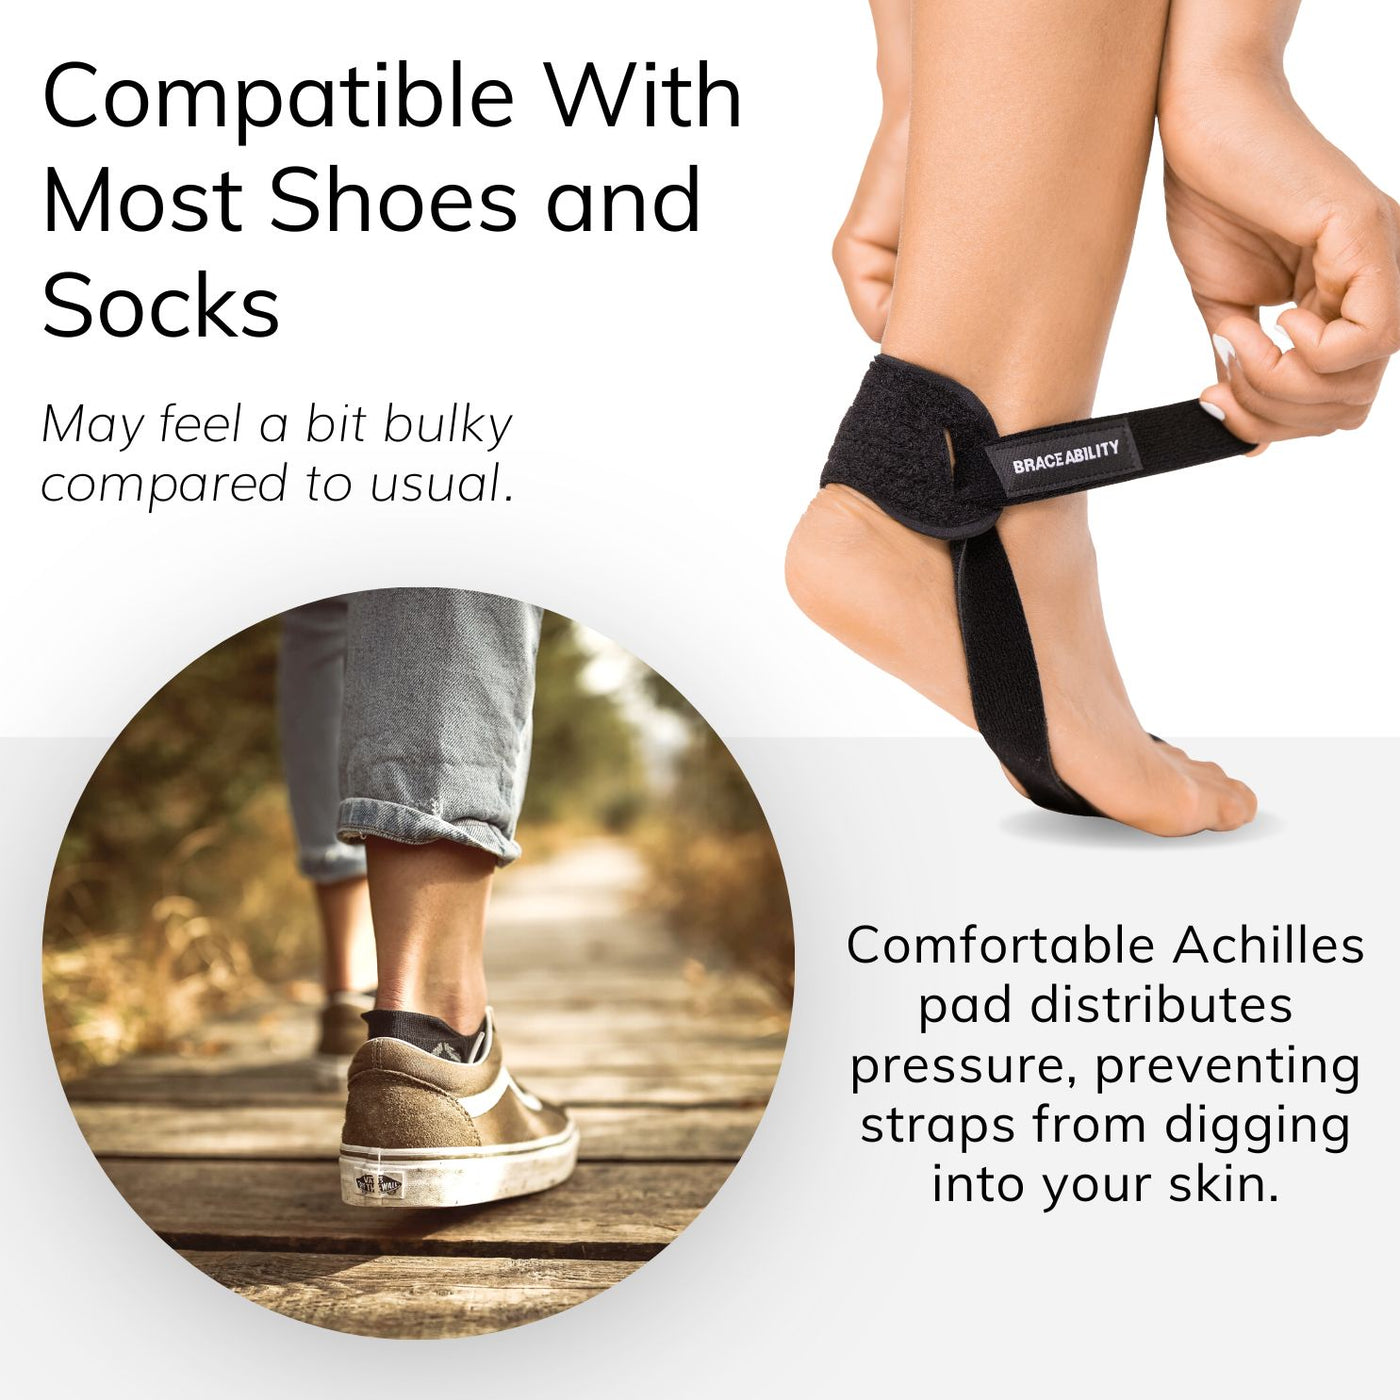 Wear our big toe injury treatment brace in shoes to prevent hyperextension